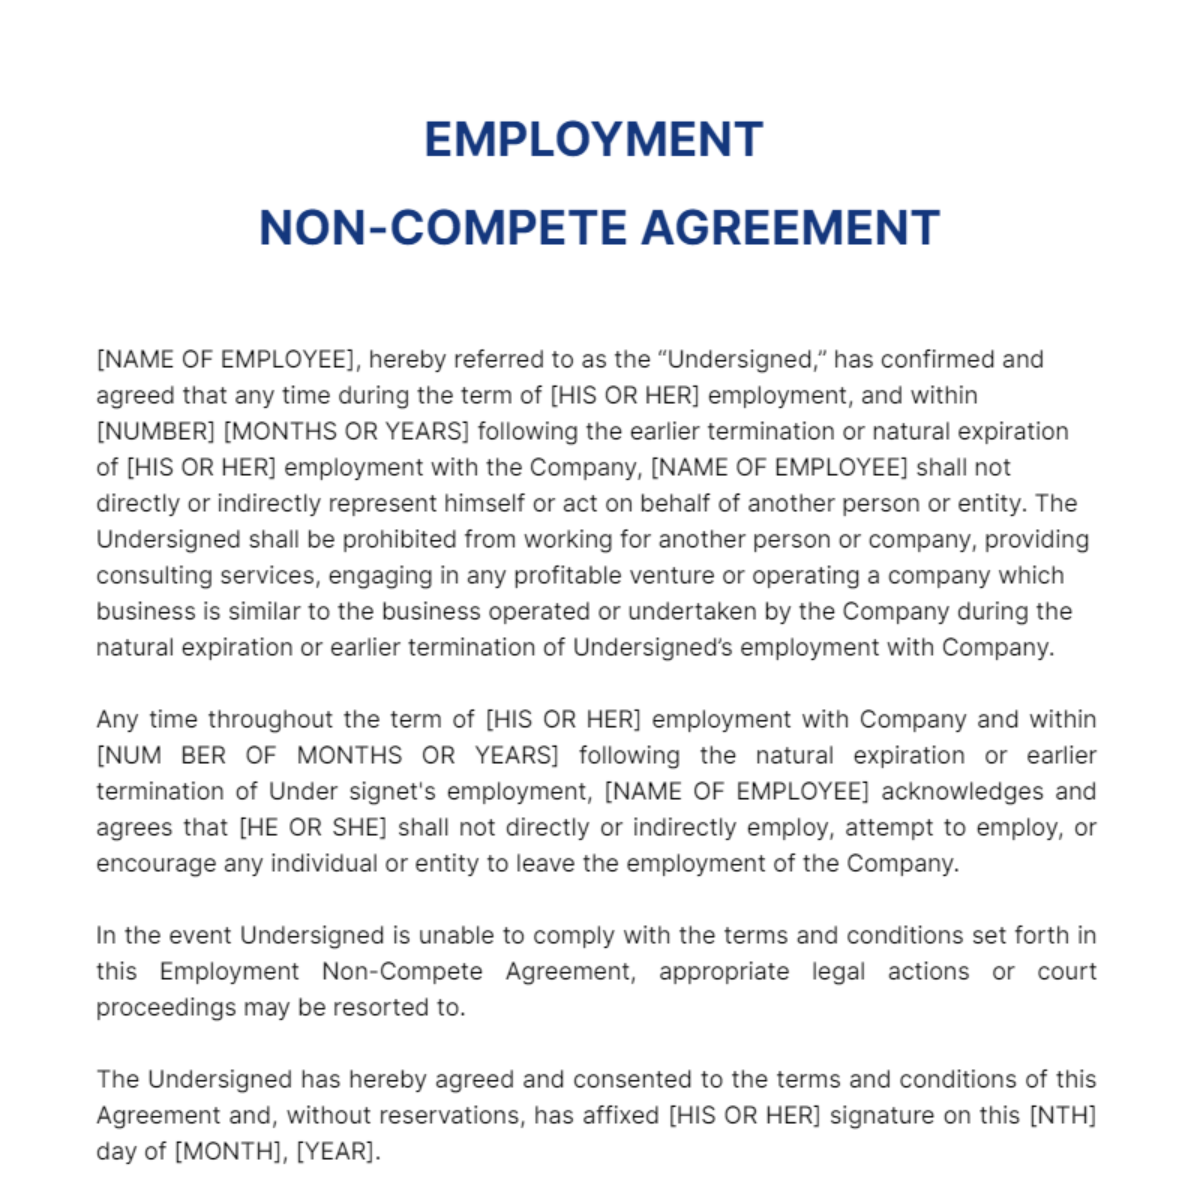 Employee Non-Compete Agreement Template